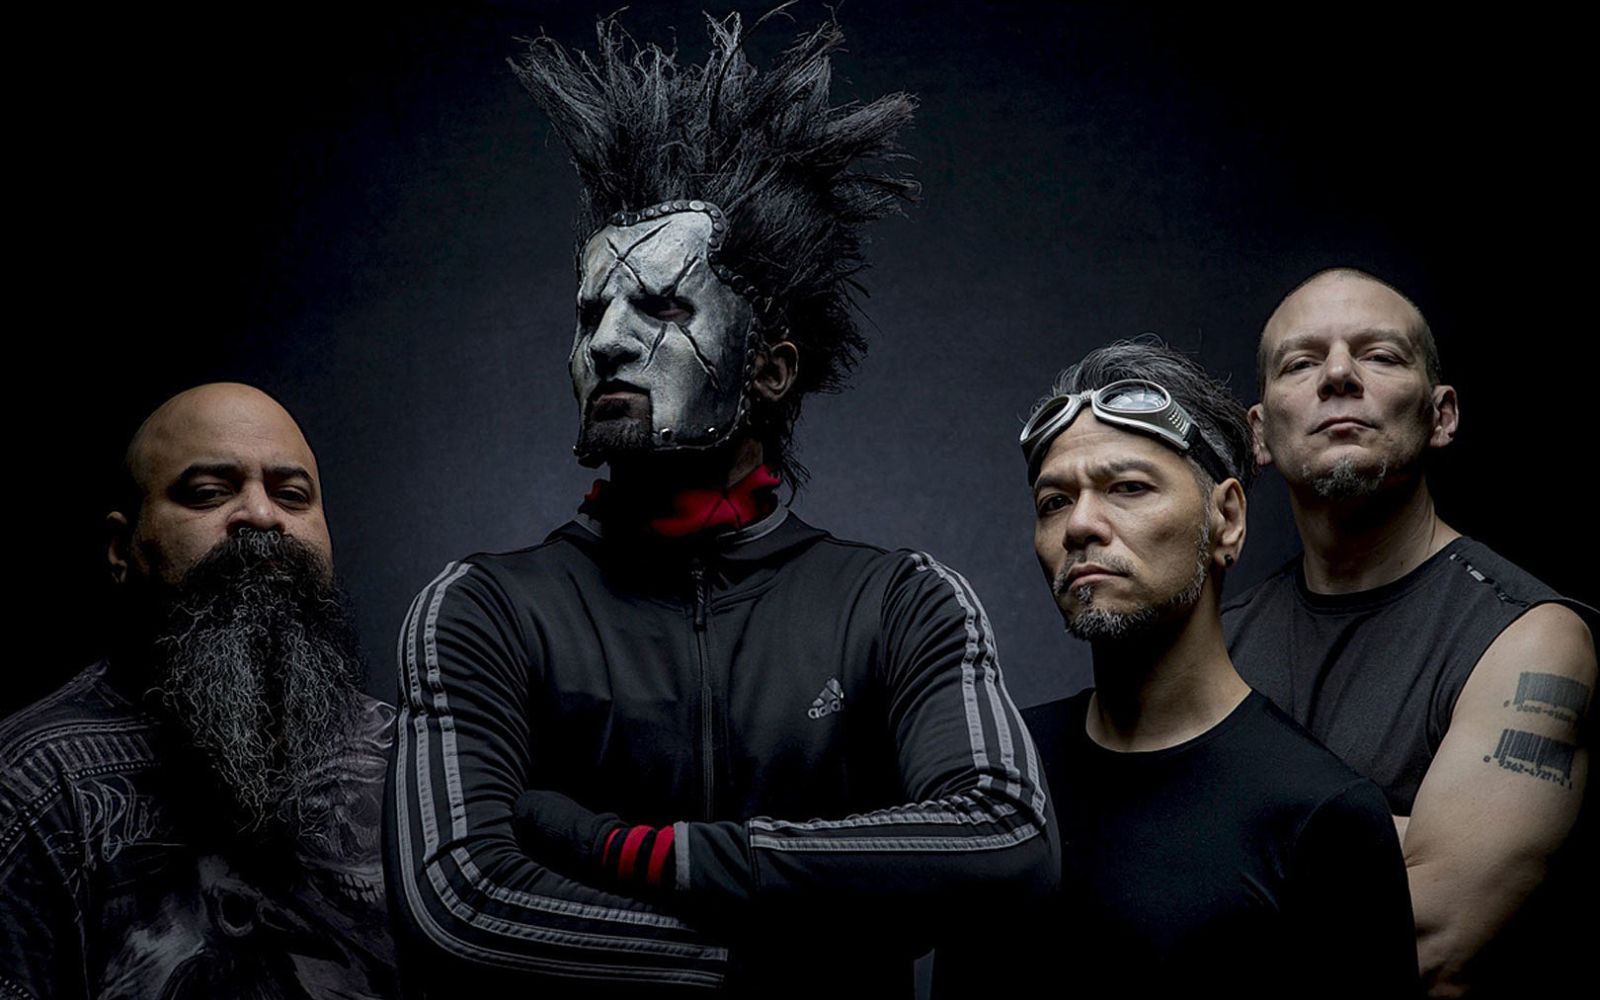 'One for the ages' StaticX and SOiL announce 2023 Australian tour